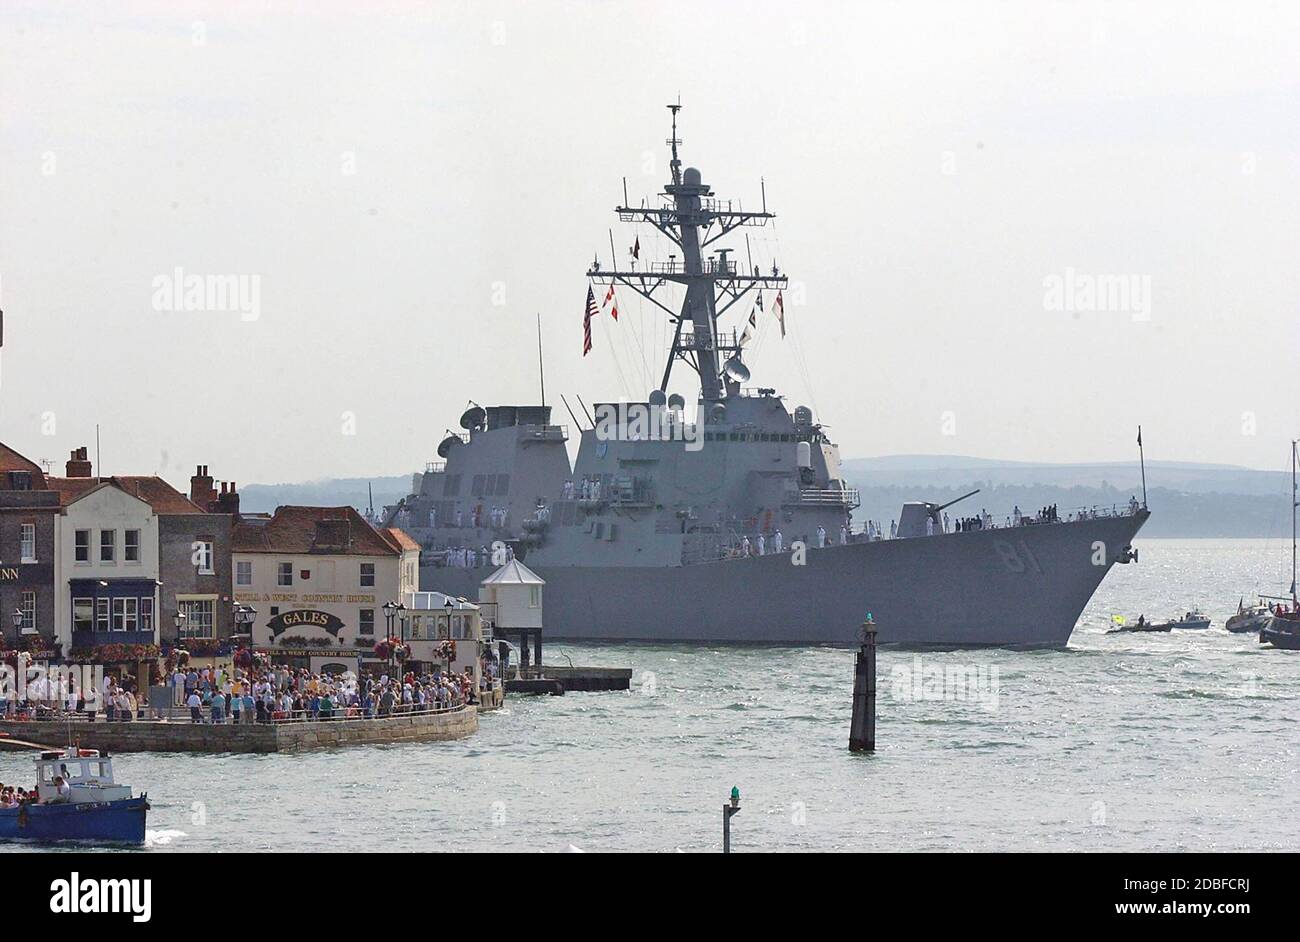 THE USS WINSTON S. CHURCHILL ENTERS PORTSMOUTH HARBOUR. THE MOST ADVANCED WARSHIP IN THE WORLD WAS VISITING A FOREIGN PORT FOR THE FIRST TIME. 2001 Stock Photo